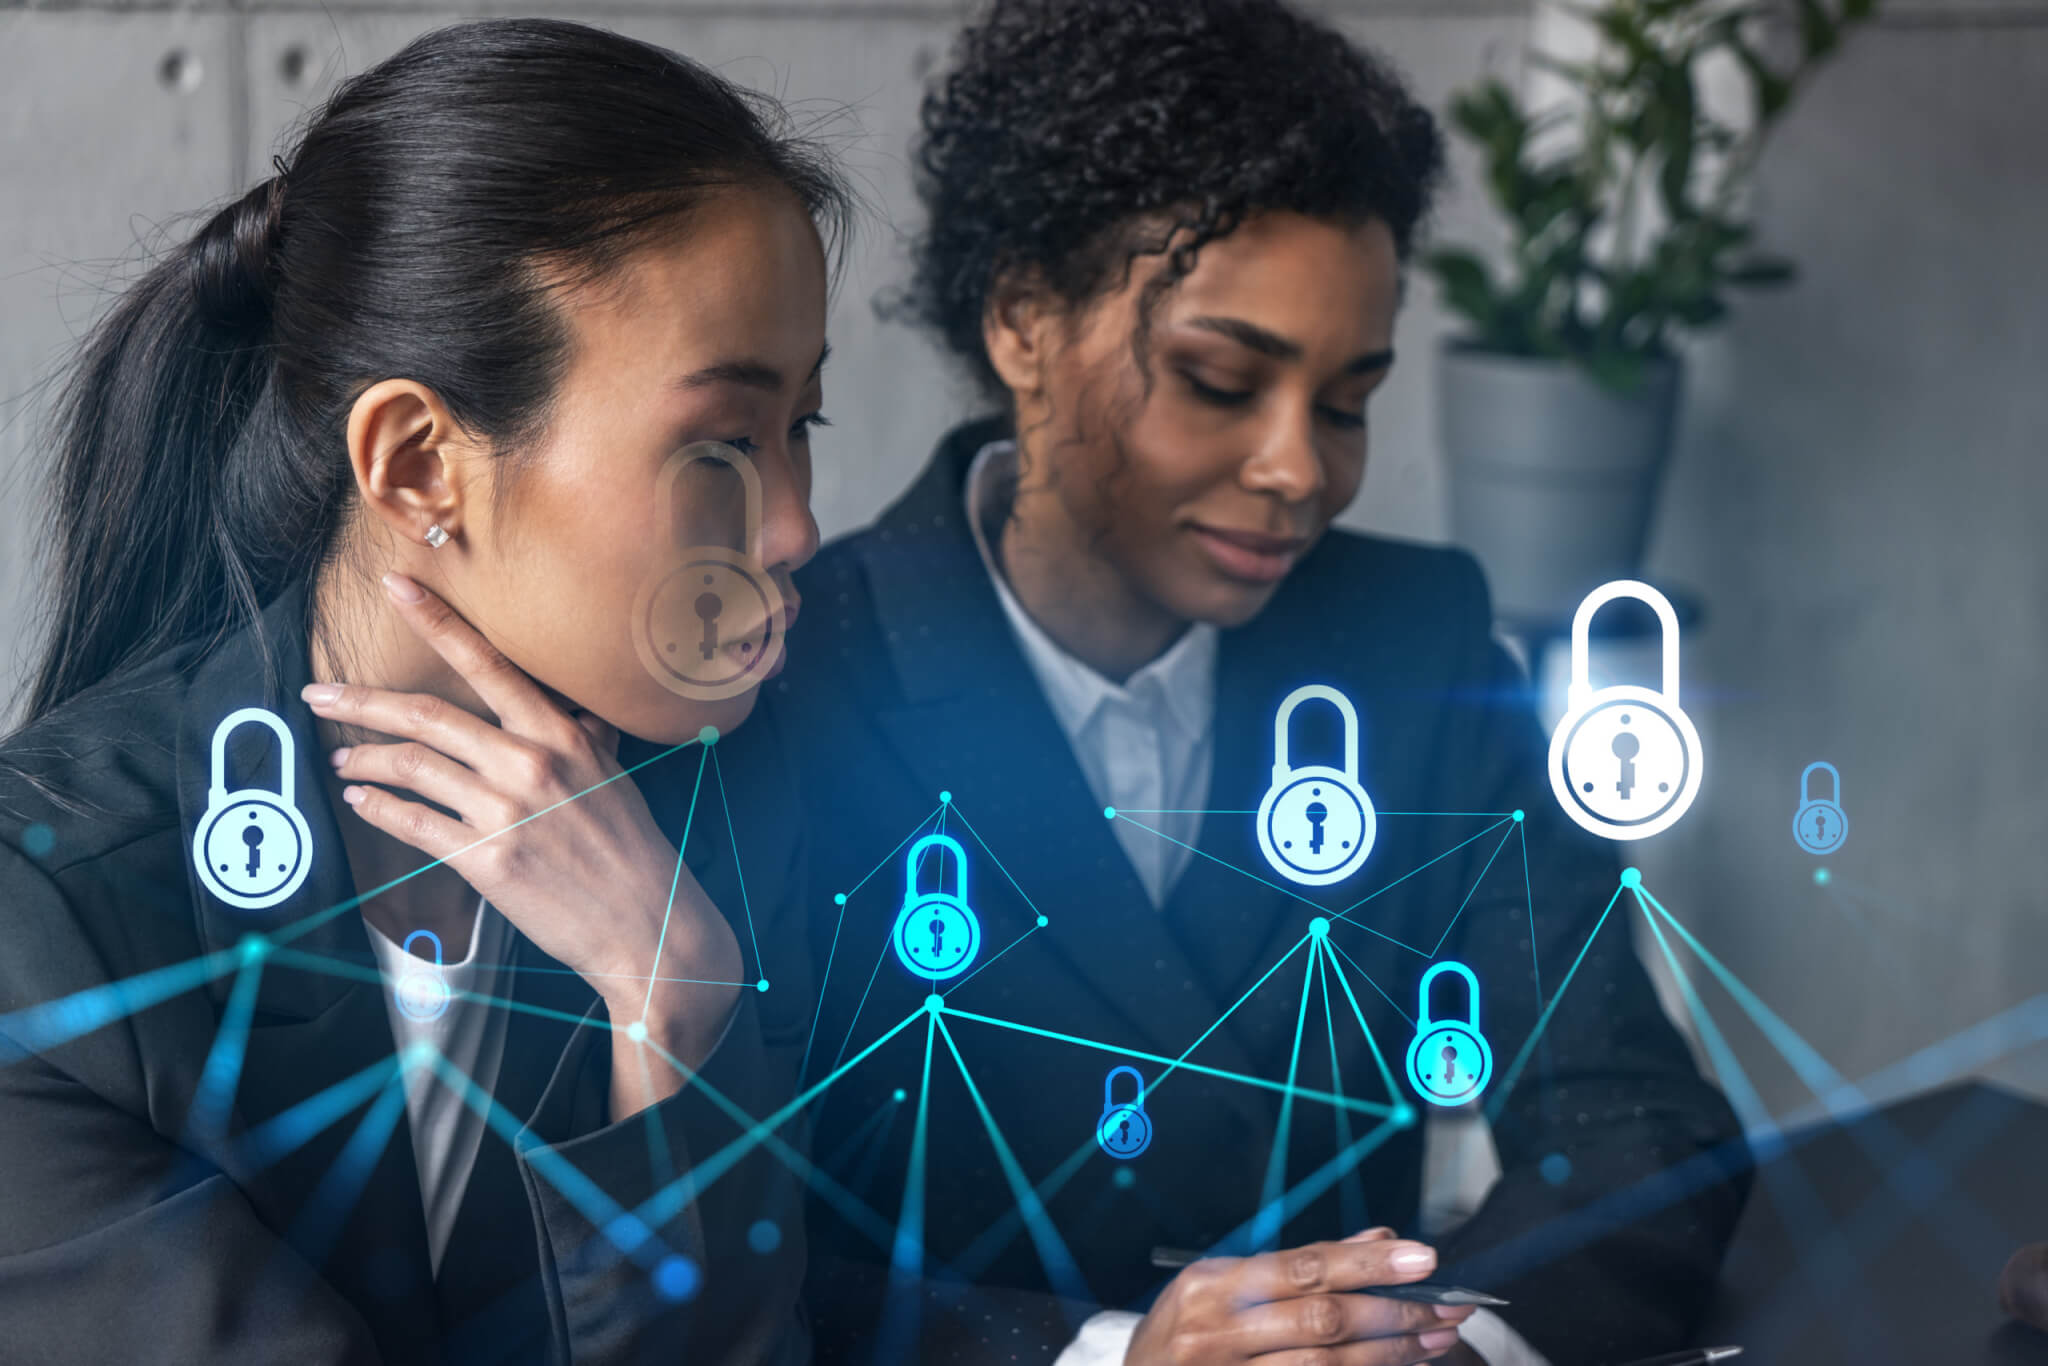 Are Your Employees Trained to have a Cybersecurity Mindset?